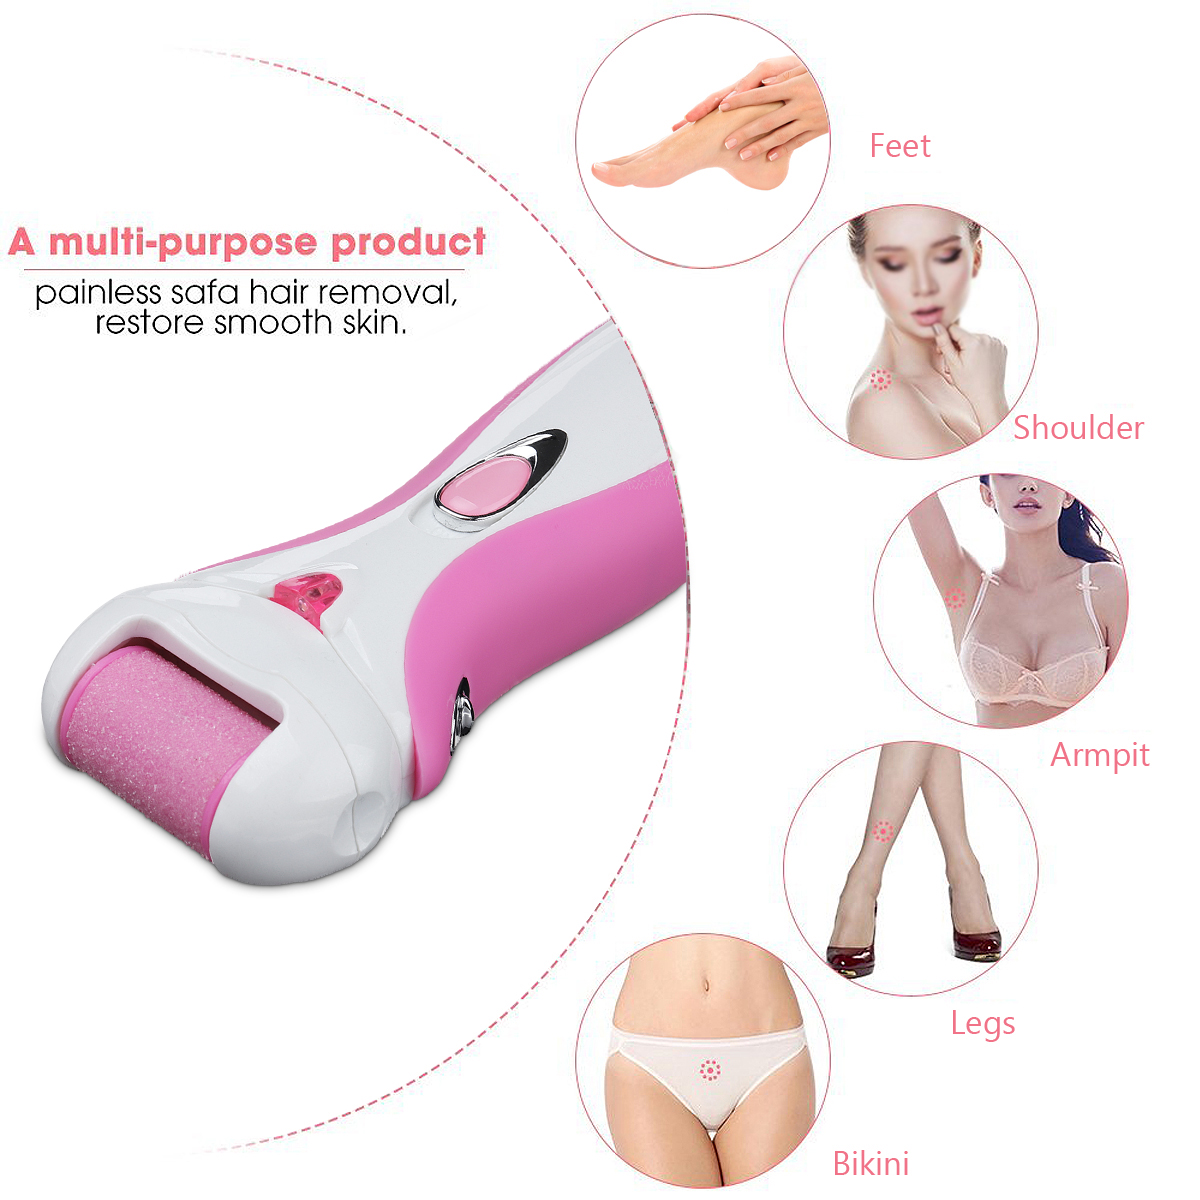 4-in-1-Electric-Foot-Grinder-Remover-Dead-Skin-Ladys-Hair-Removal-Painless-Shaver-Epilator-Exfoliat-1290631